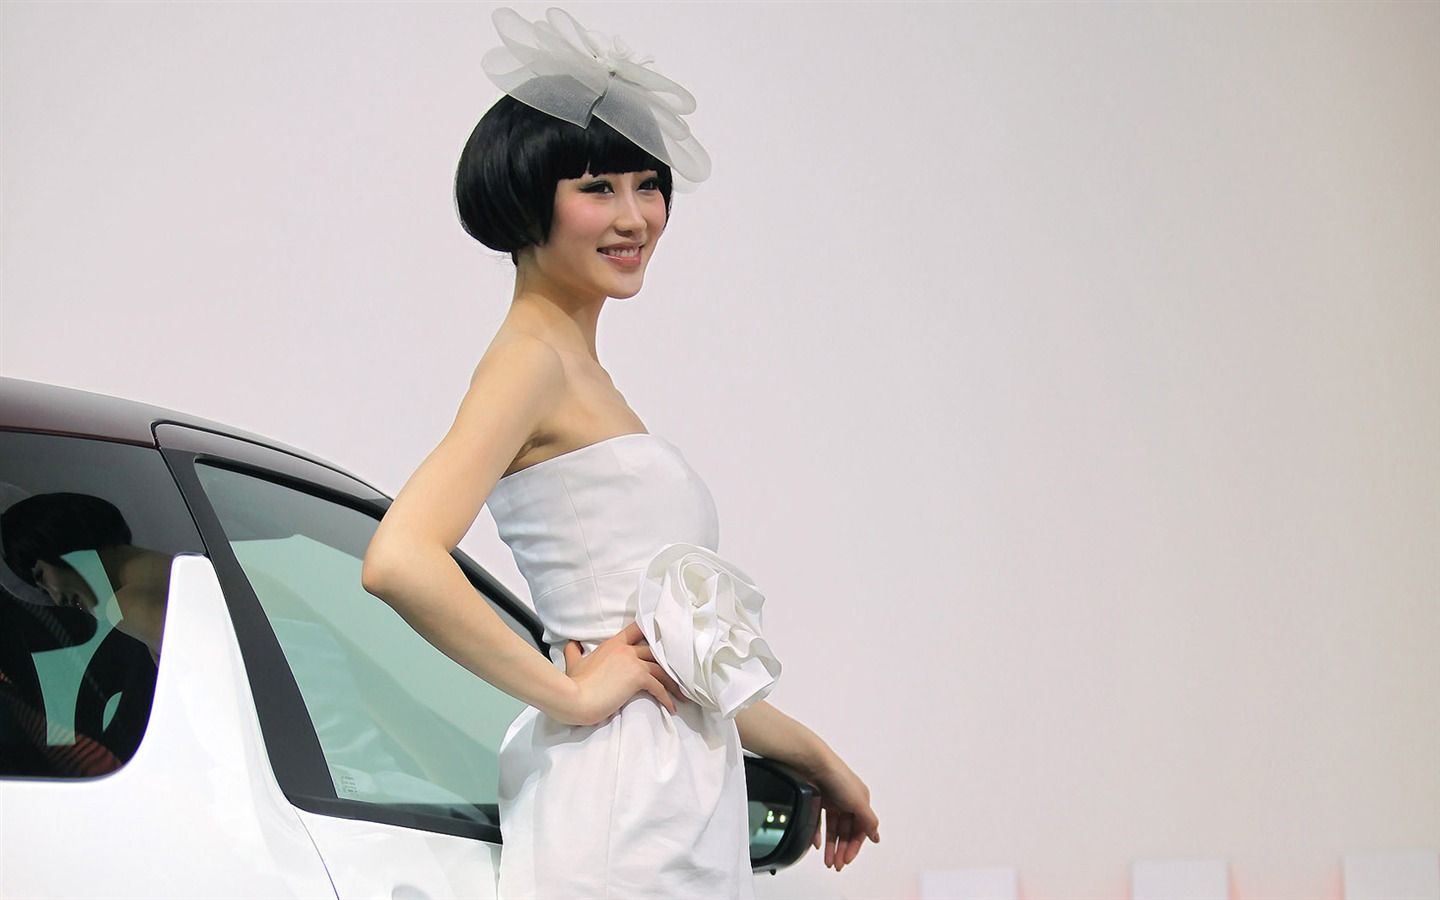 2010 Beijing Auto Show car models Collection (2) #8 - 1440x900